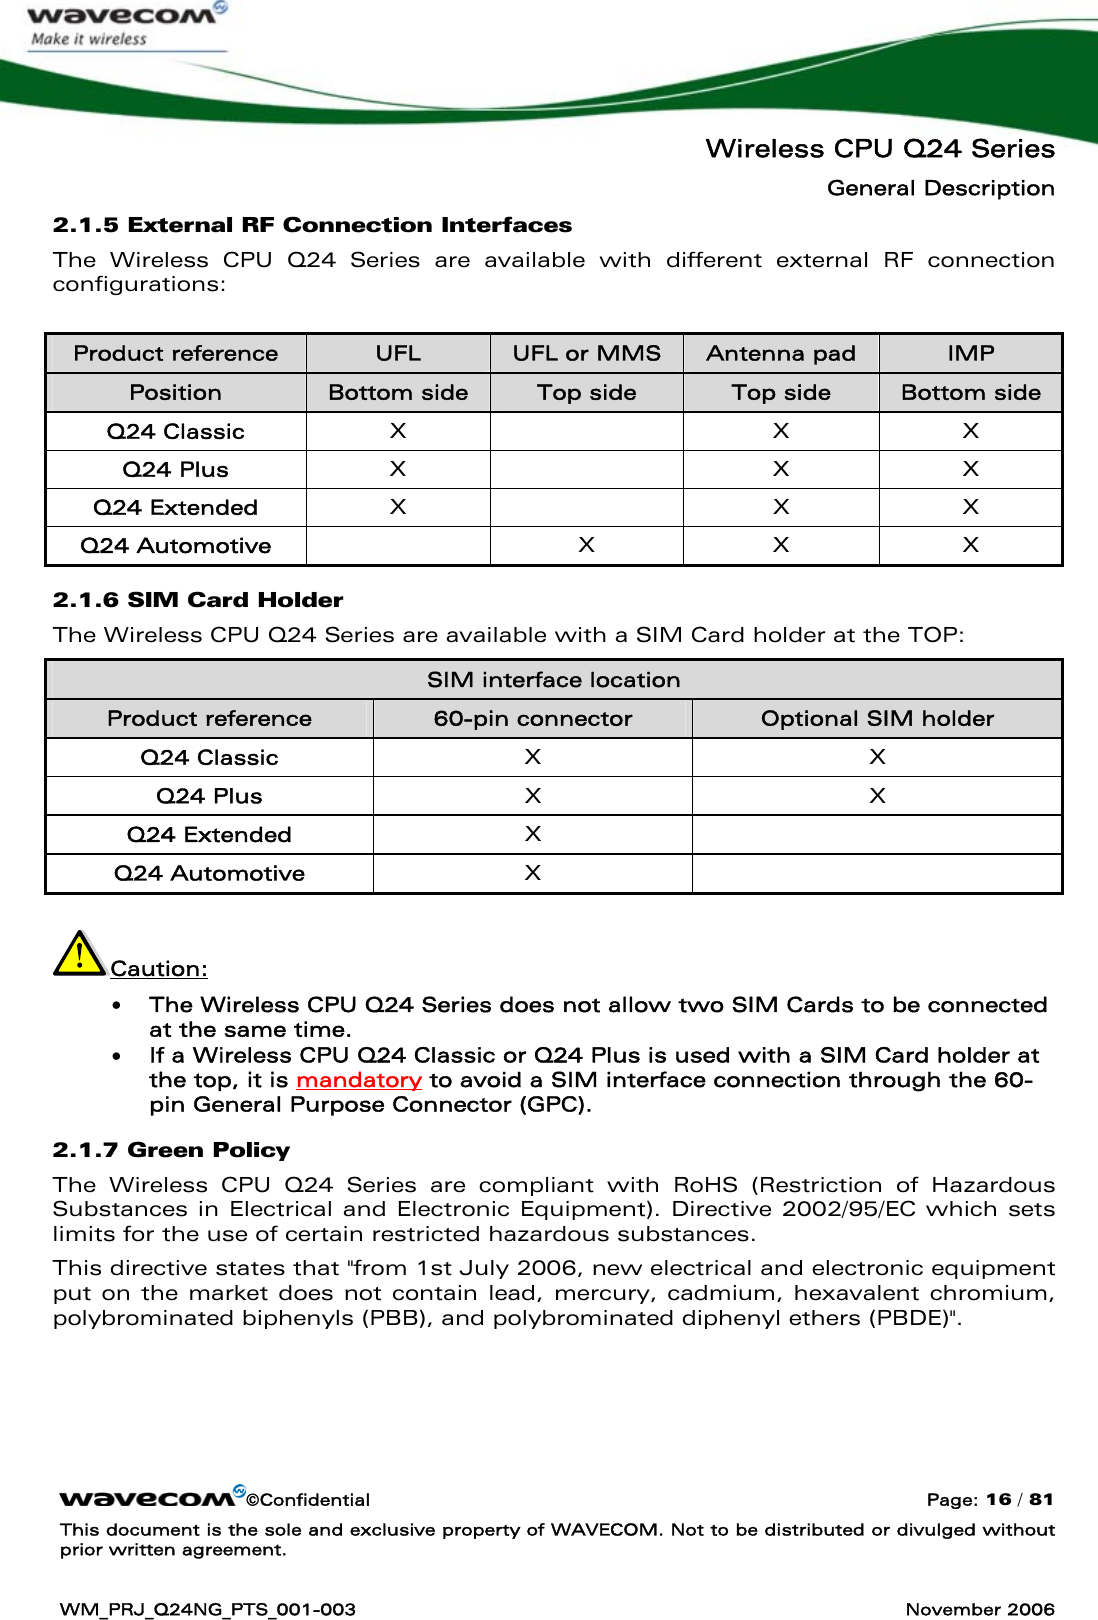   Wireless CPU Q24 Series General Description ©Confidential  Page: 16 / 81 This document is the sole and exclusive property of WAVECOM. Not to be distributed or divulged without prior written agreement.  WM_PRJ_Q24NG_PTS_001-003  November 2006  2.1.5 External RF Connection Interfaces The Wireless CPU Q24 Series are available with different external RF connection configurations:  Product reference  UFL  UFL or MMS   Antenna pad   IMP Position  Bottom side  Top side  Top side  Bottom side Q24 Classic  X   X X Q24 Plus  X   X X Q24 Extended  X   X X Q24 Automotive   X X X 2.1.6 SIM Card Holder The Wireless CPU Q24 Series are available with a SIM Card holder at the TOP: SIM interface location Product reference  60-pin connector  Optional SIM holder Q24 Classic  X X Q24 Plus  X X Q24 Extended  X  Q24 Automotive  X   Caution: • The Wireless CPU Q24 Series does not allow two SIM Cards to be connected at the same time. • If a Wireless CPU Q24 Classic or Q24 Plus is used with a SIM Card holder at the top, it is mandatory to avoid a SIM interface connection through the 60-pin General Purpose Connector (GPC). 2.1.7 Green Policy The Wireless CPU Q24 Series are compliant with RoHS (Restriction of Hazardous Substances in Electrical and Electronic Equipment). Directive 2002/95/EC which sets limits for the use of certain restricted hazardous substances.  This directive states that &quot;from 1st July 2006, new electrical and electronic equipment put on the market does not contain lead, mercury, cadmium, hexavalent chromium, polybrominated biphenyls (PBB), and polybrominated diphenyl ethers (PBDE)&quot;.    